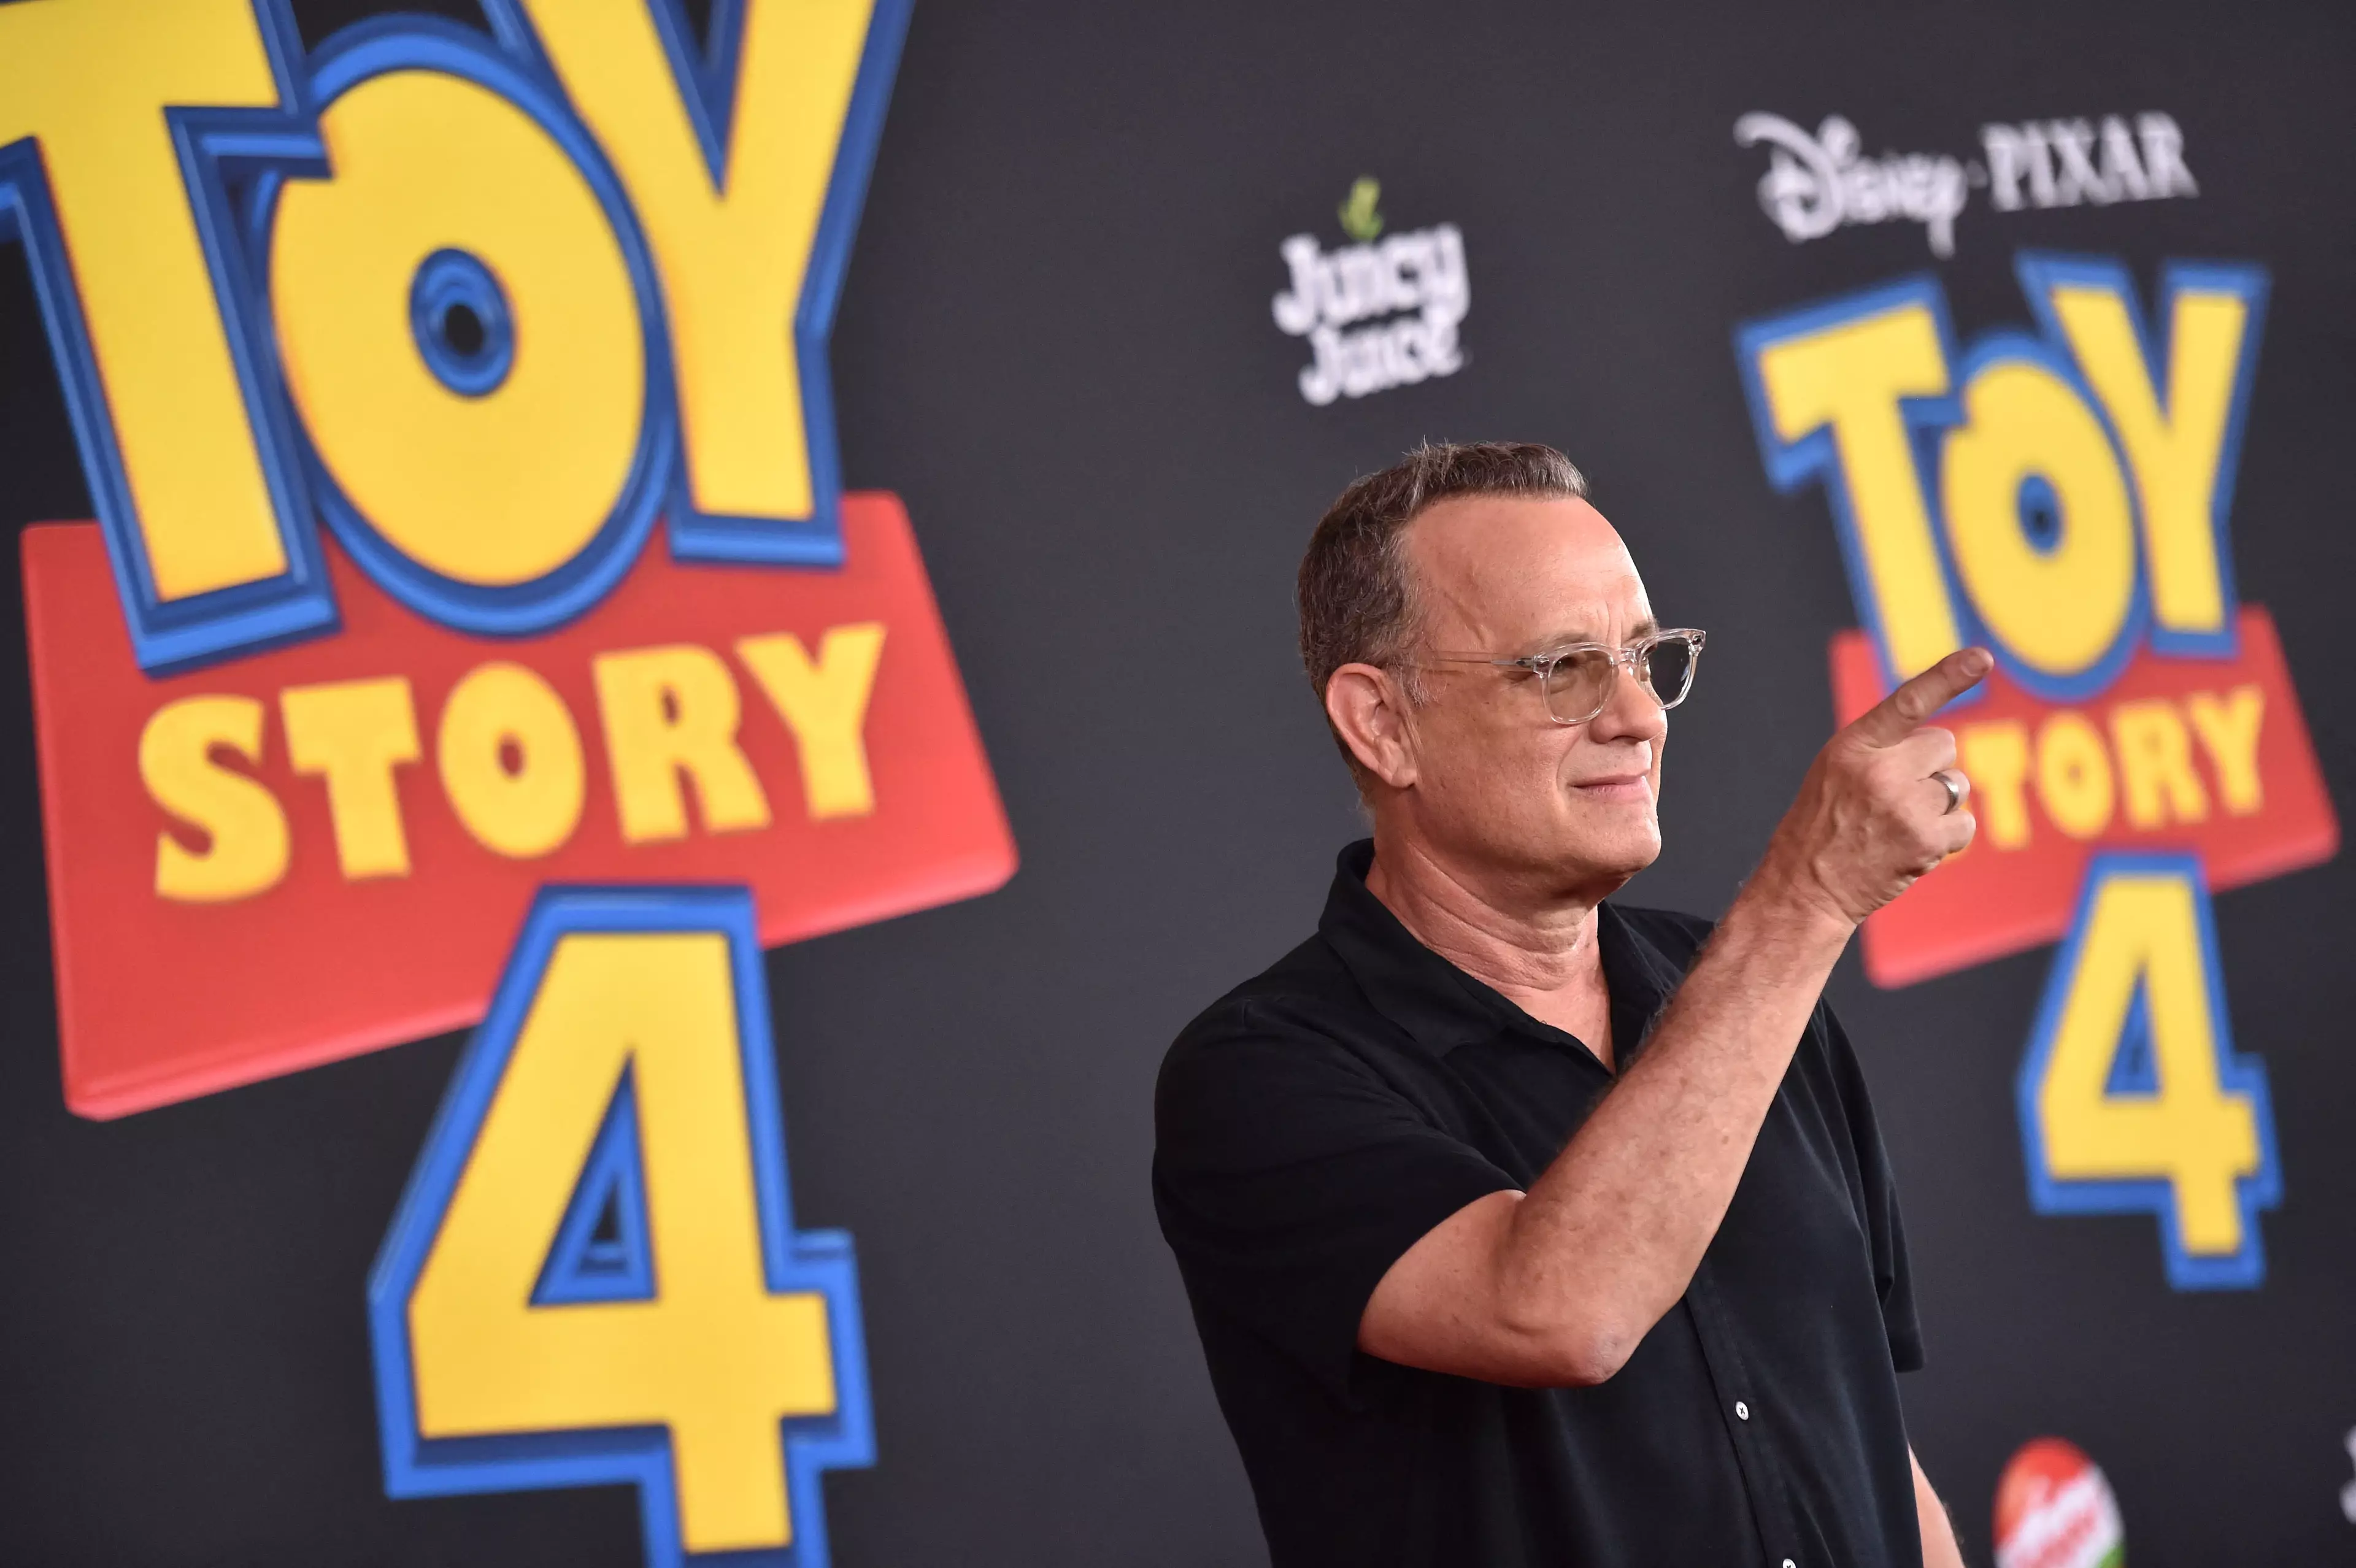 Tom Hanks has said he wouldn't be surprised if we one day see a Toy Story 5.